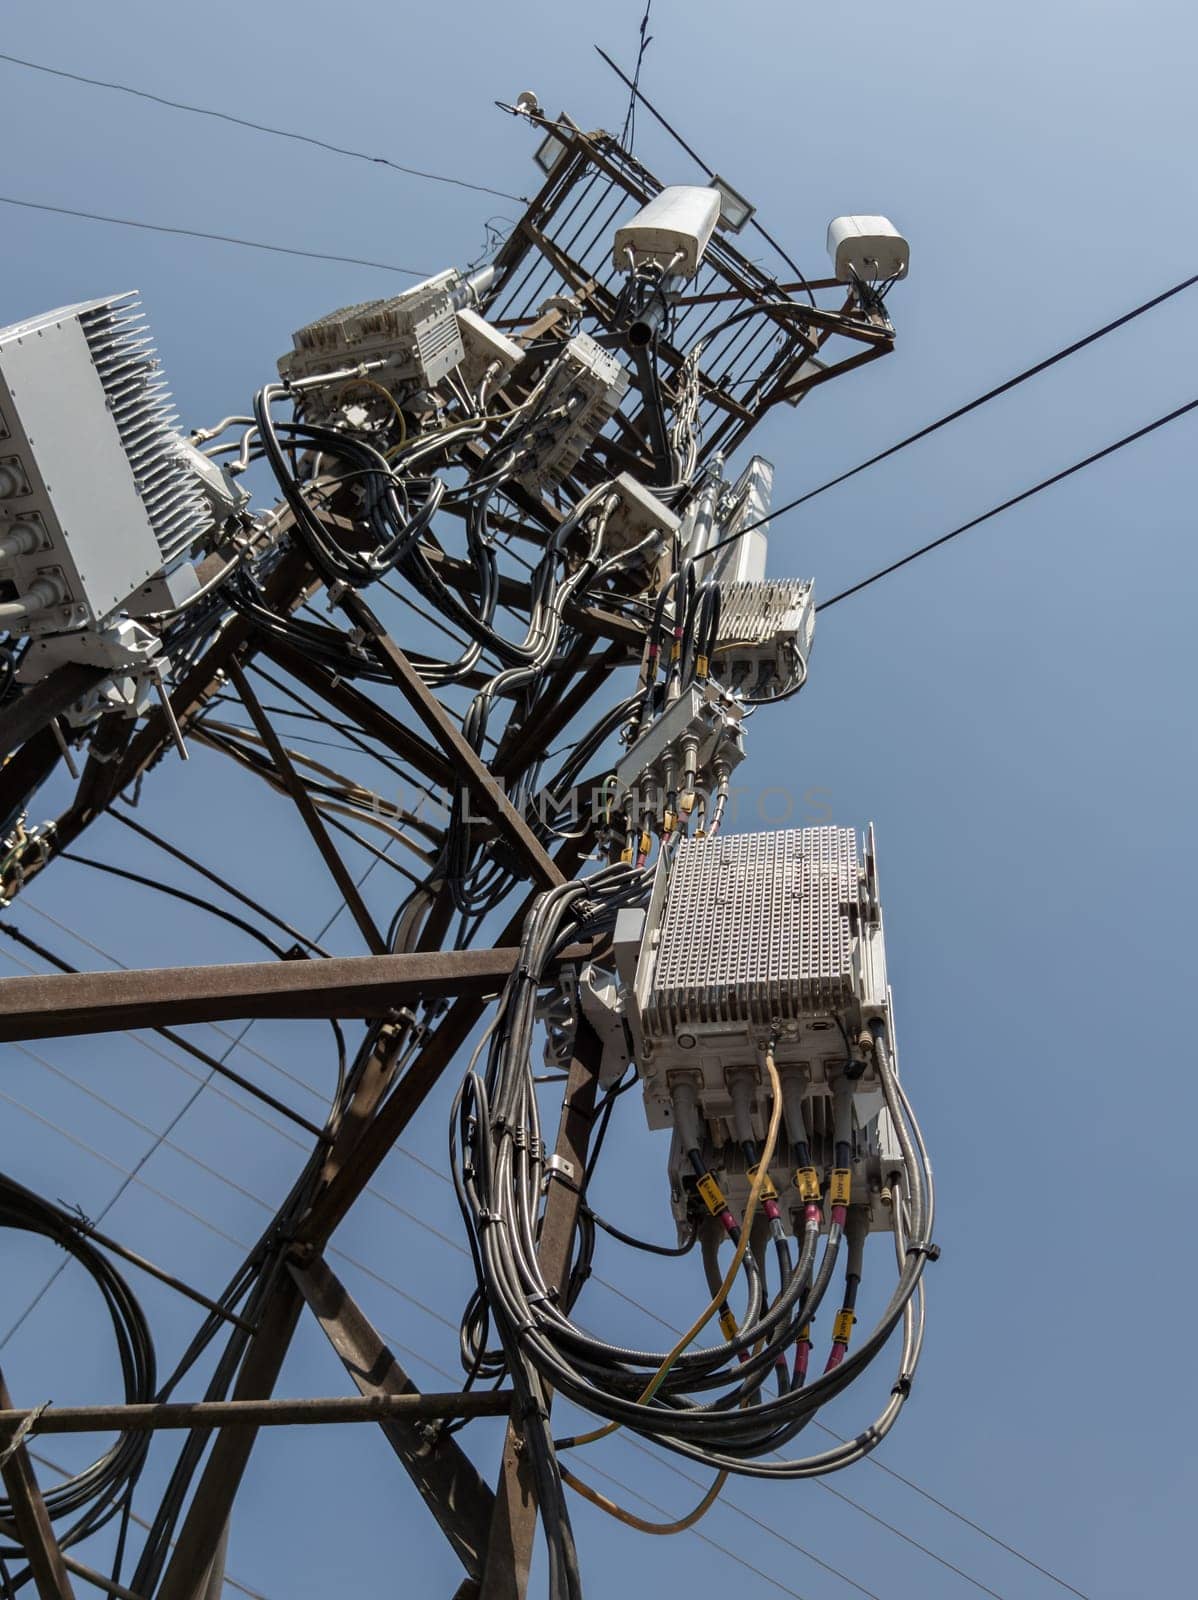 Detailed view of a cluttered utility pole, featuring an assortment of electronic equipment, including multiple antennas, circuit boxes, and tangled wires against a clear blue sky.